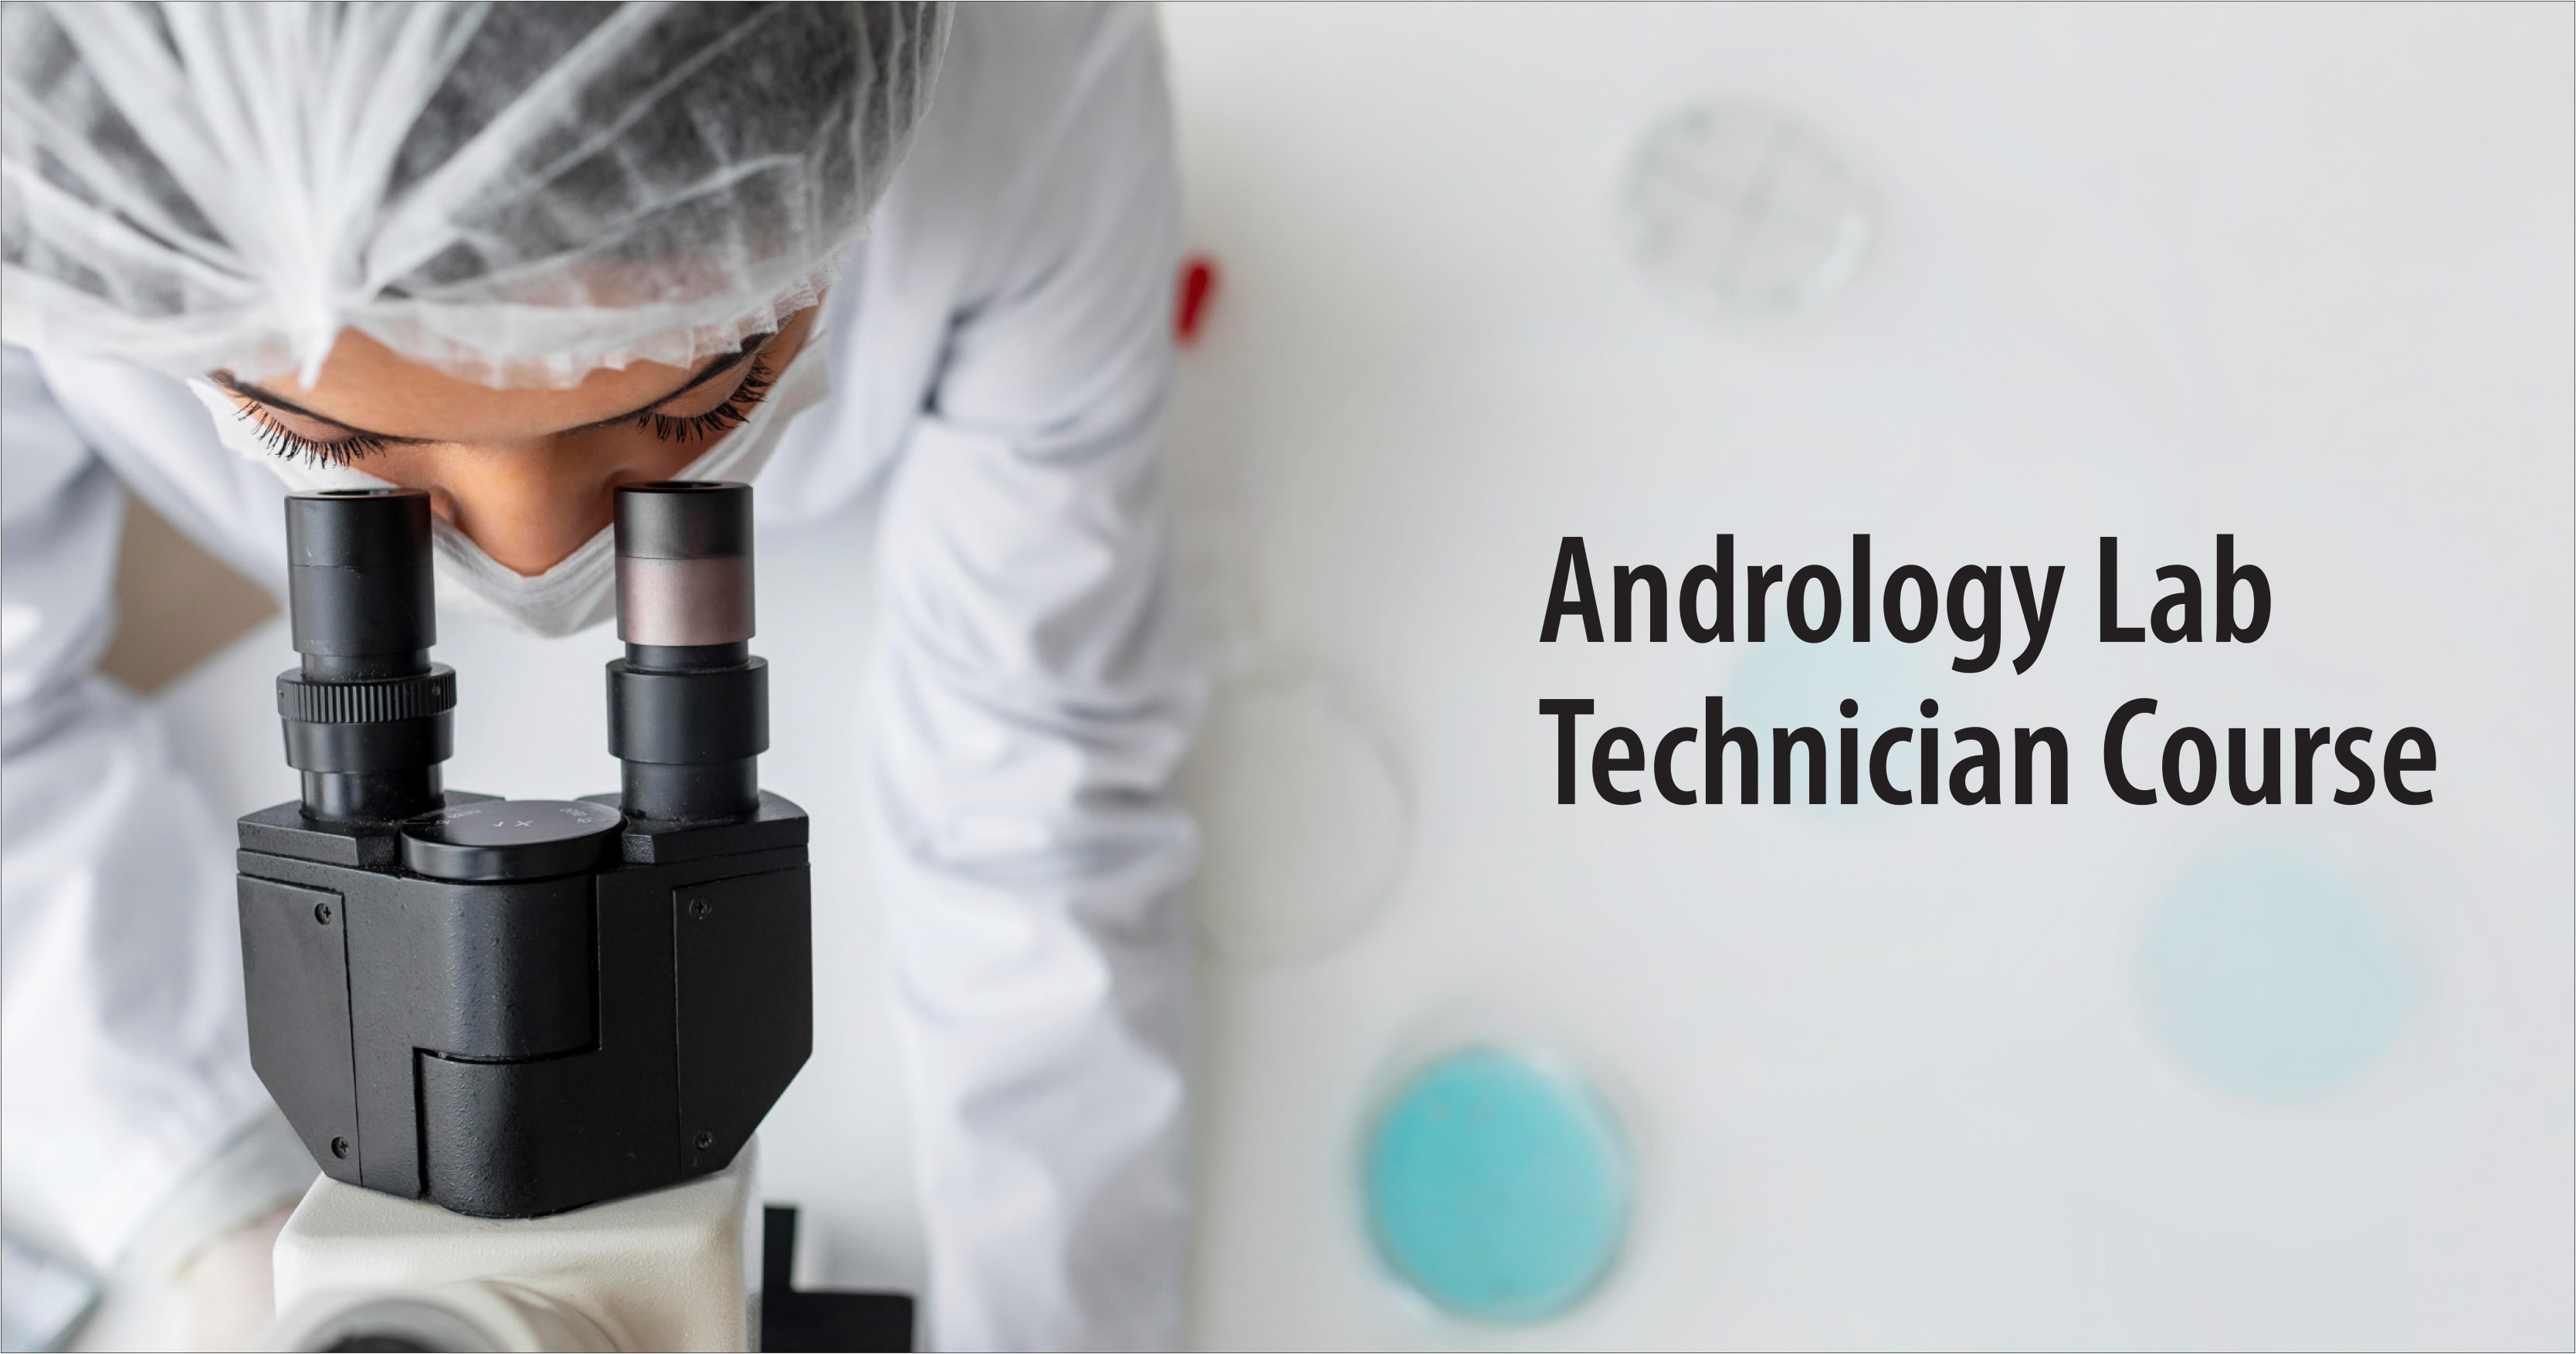 Andrology Lab Technician Course